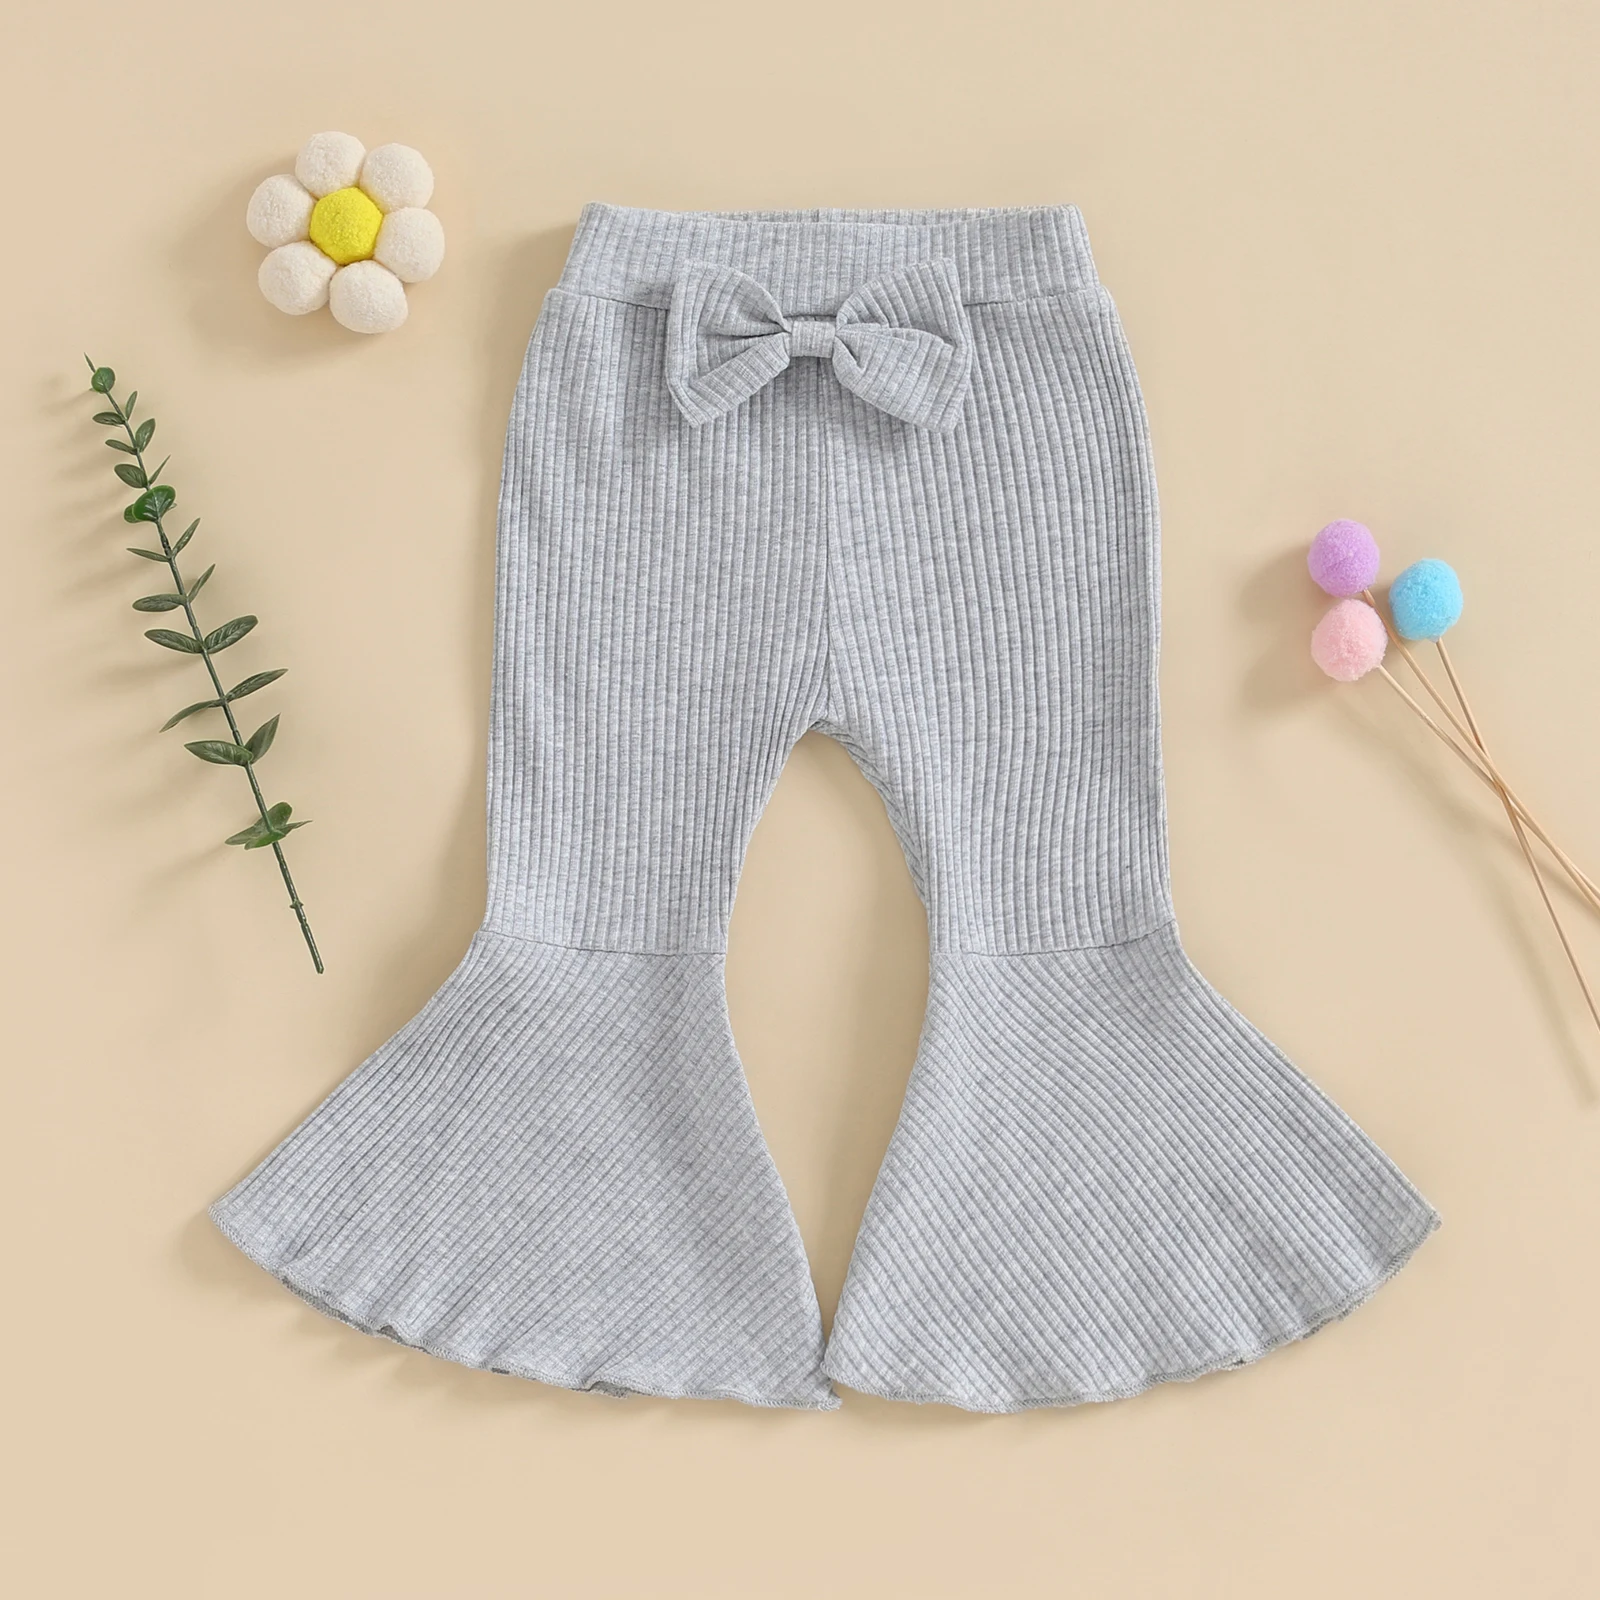 Sf416906697044905b79869977cf8b853C Cute Kids Baby Girls Flare Pants Soft Cotton Solid Color Ribbed Elastic Toddler Bell Bottoms Trousers Bow Ruffle Pants for Child